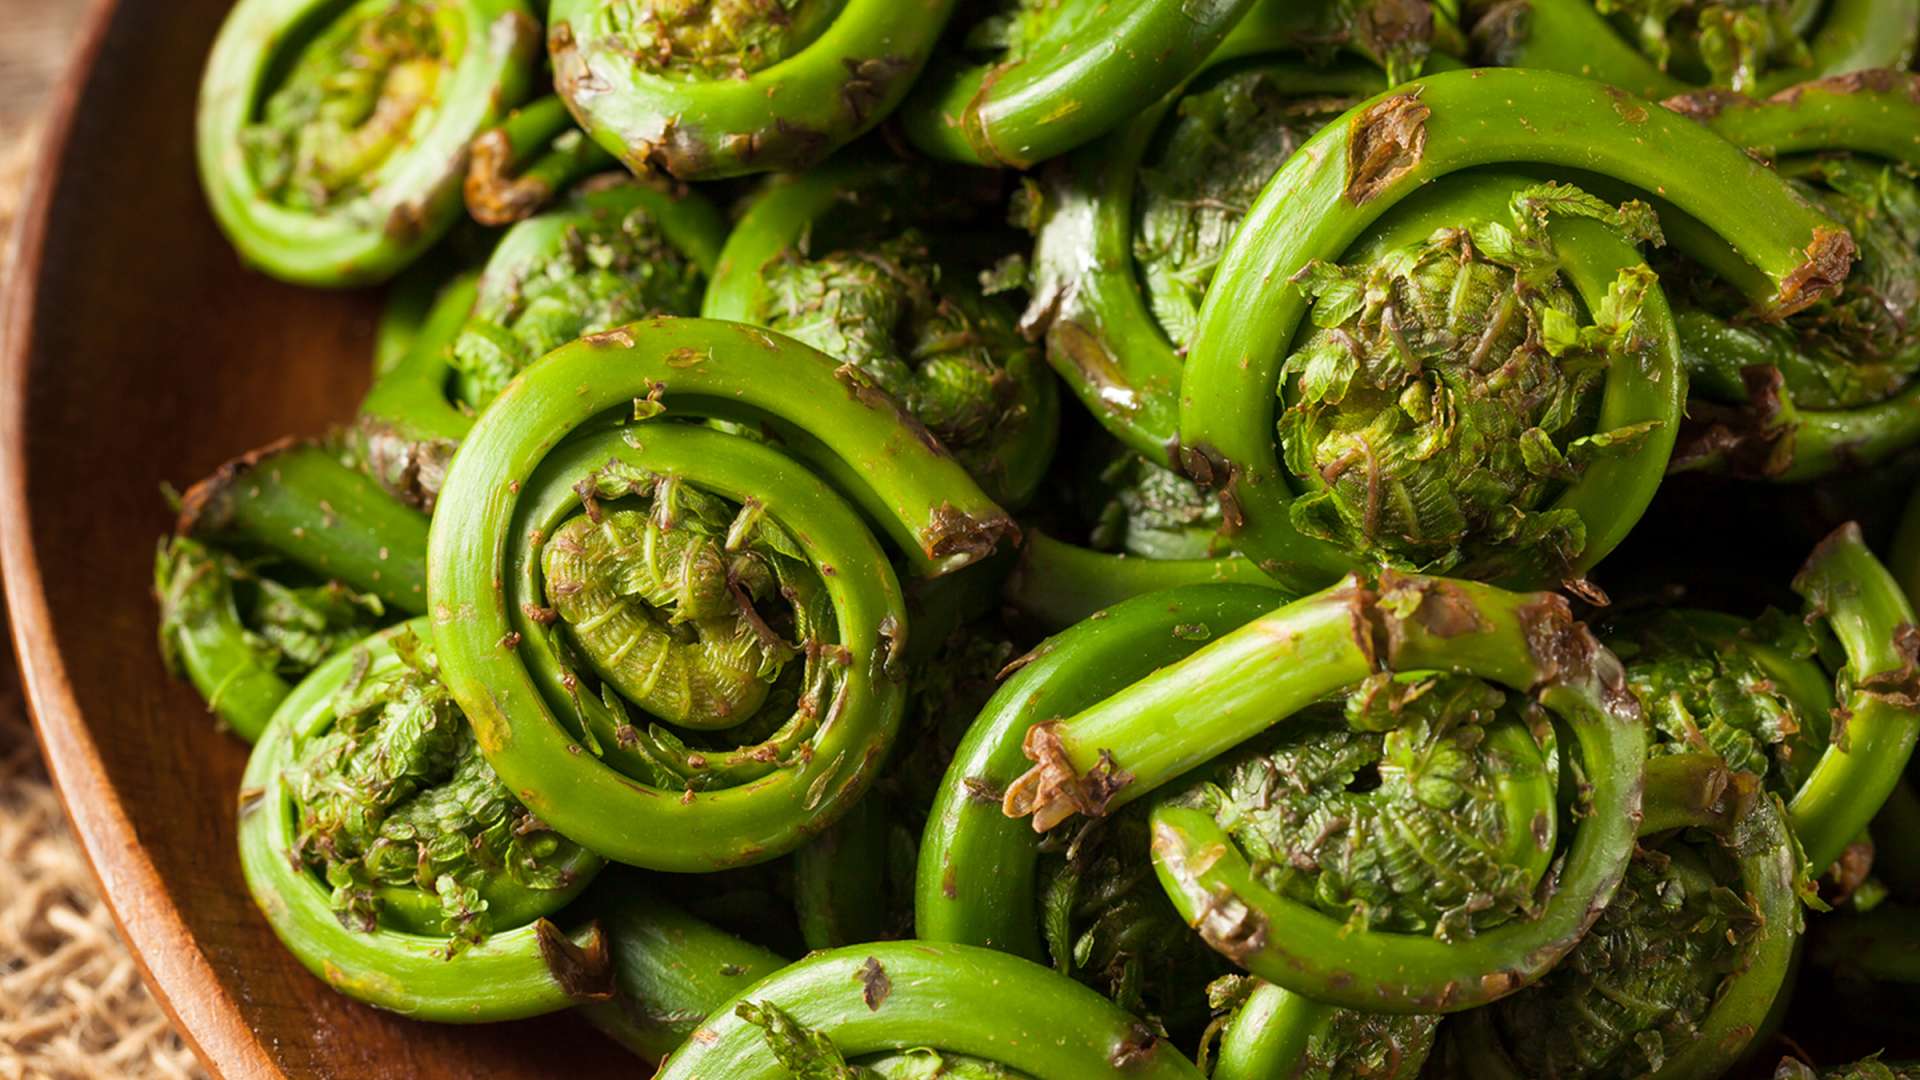 Learn to Prepare Fiddleheads at Fiddleheads Food Co-op